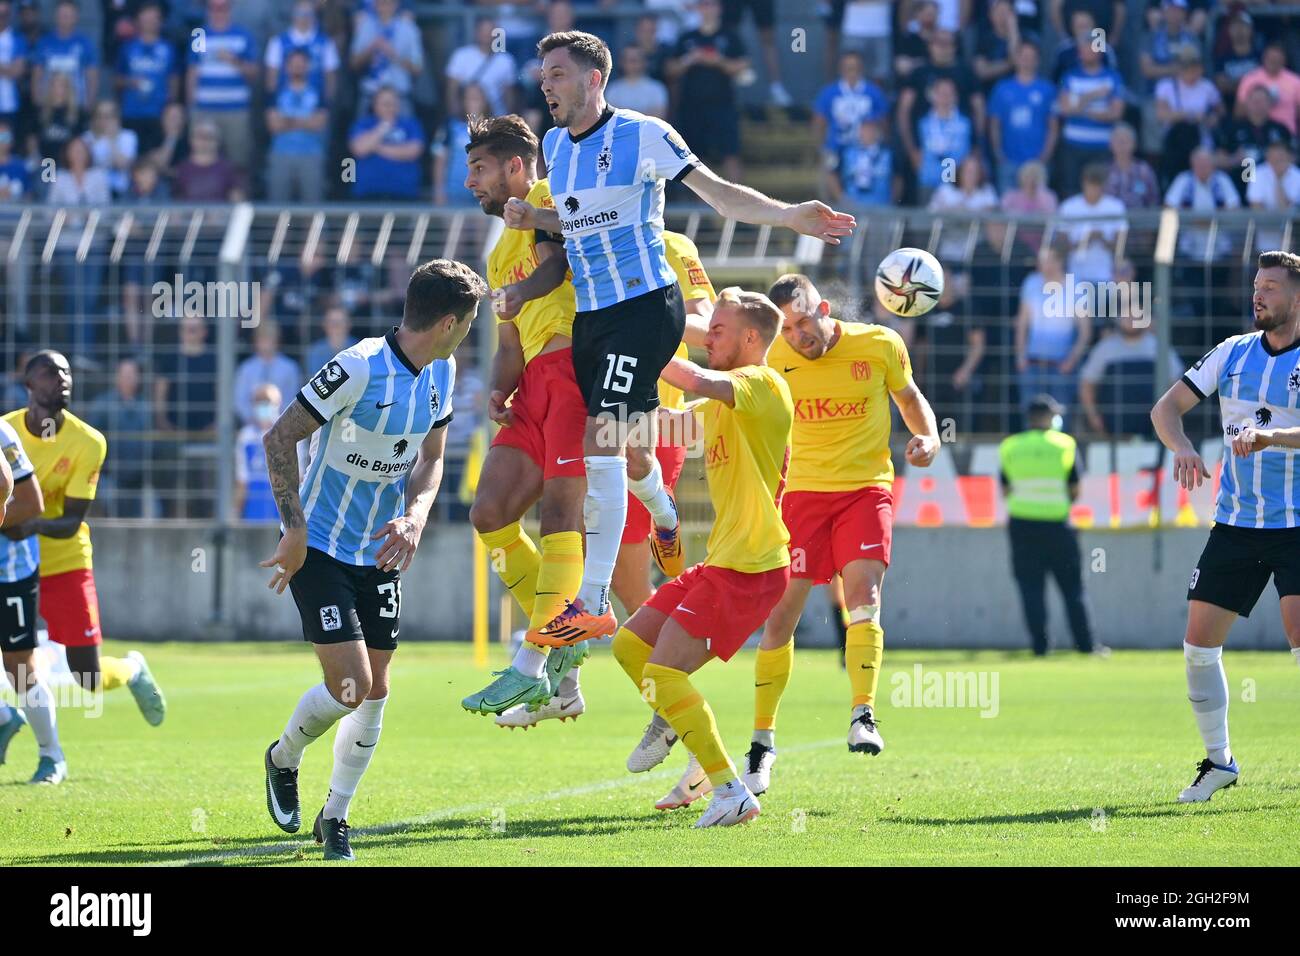 Penalty area scene with Marcel BAER (Munich 1860), action. Soccer 3rd league, Liga3, TSV Munich 1860-SV Meppen 1-1 on 04.09.2021 in Muenchen GRUENWALDER STADION. DFL REGULATIONS PROHIBIT ANY USE OF PHOTOGRAPHS AS IMAGE SEQUENCES AND/OR QUASI-VIDEO. Stock Photo